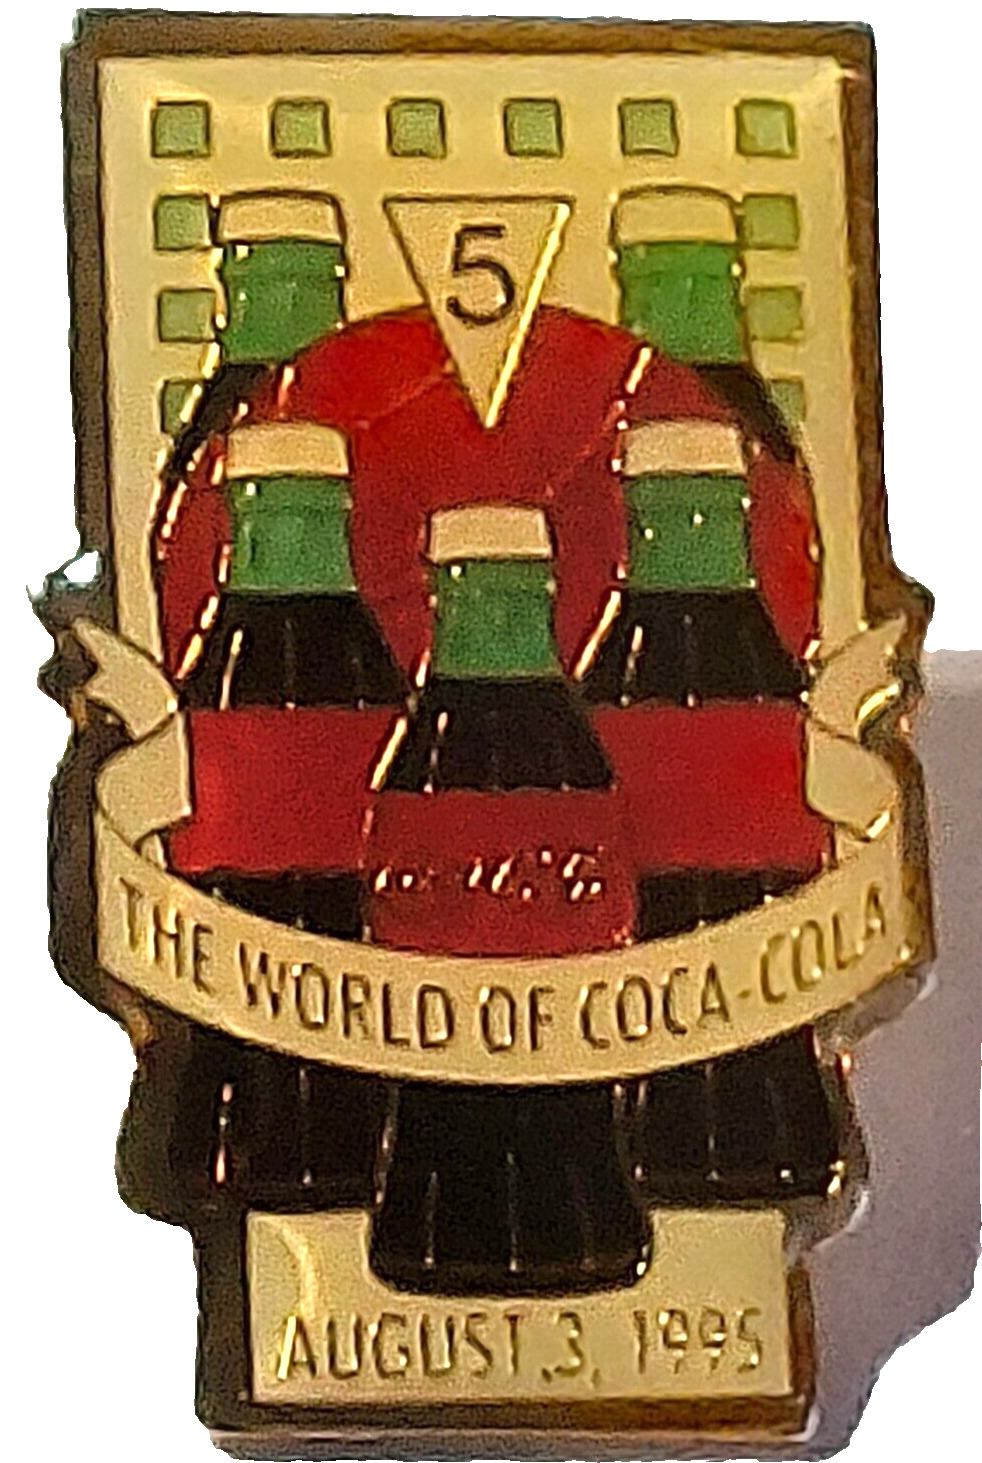 The World of Coca-Cola August 3 1995 Lapel Pin